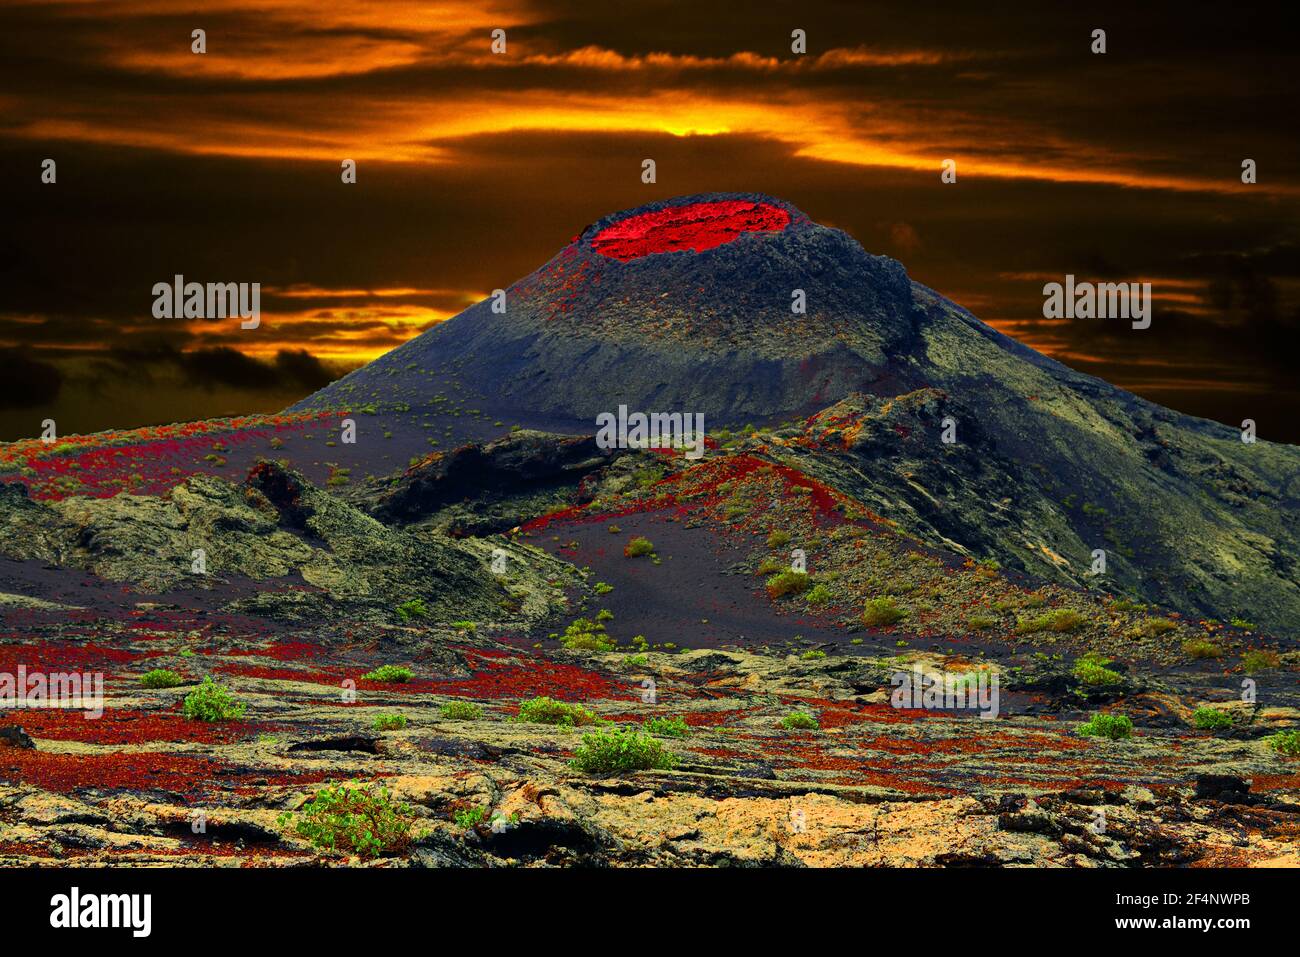 Pico Partido is a volcano in the Timanfaya National Park on the island of Lanzarote. In this fantasy image the volcano is made to look active. Stock Photo